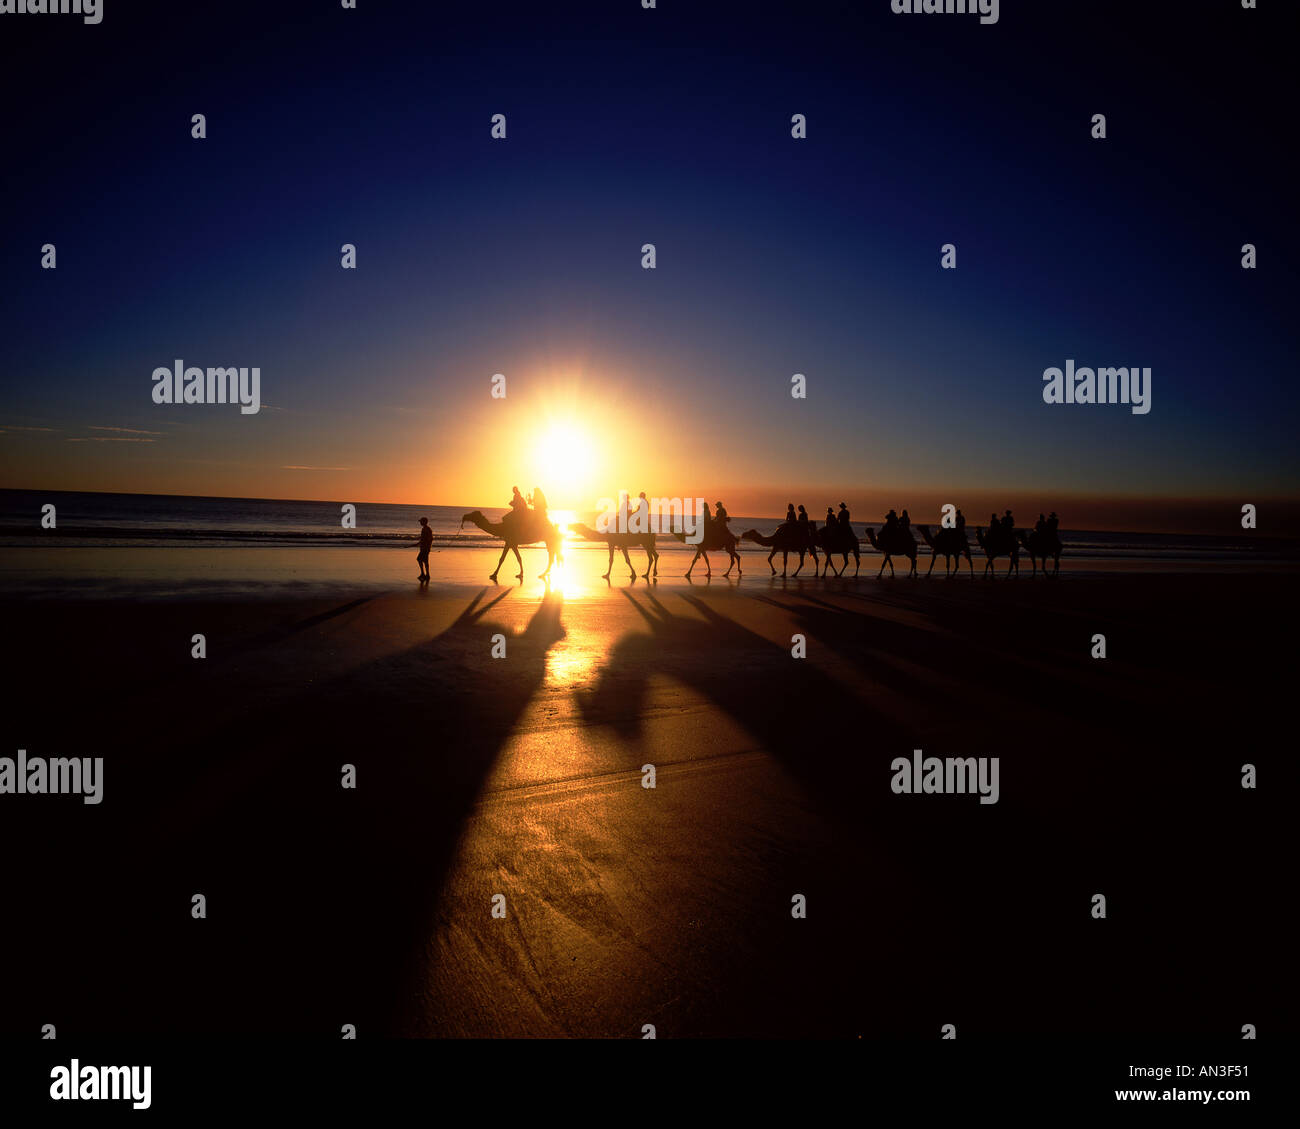 Camels at sunset Cable Beach Broome WA Australia Stock Photo